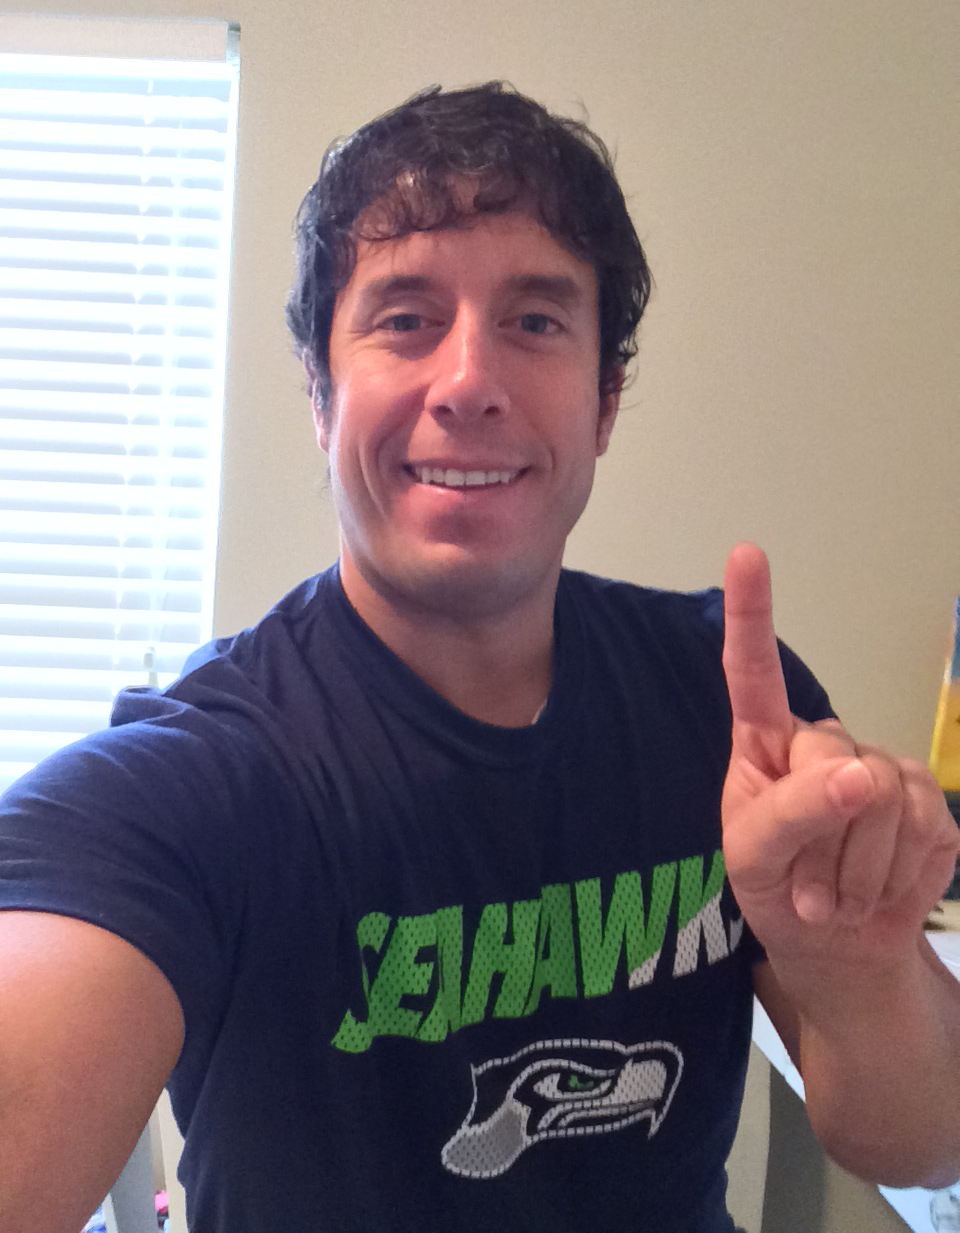 I am ready to cheer on the Seattle Seahawks today!